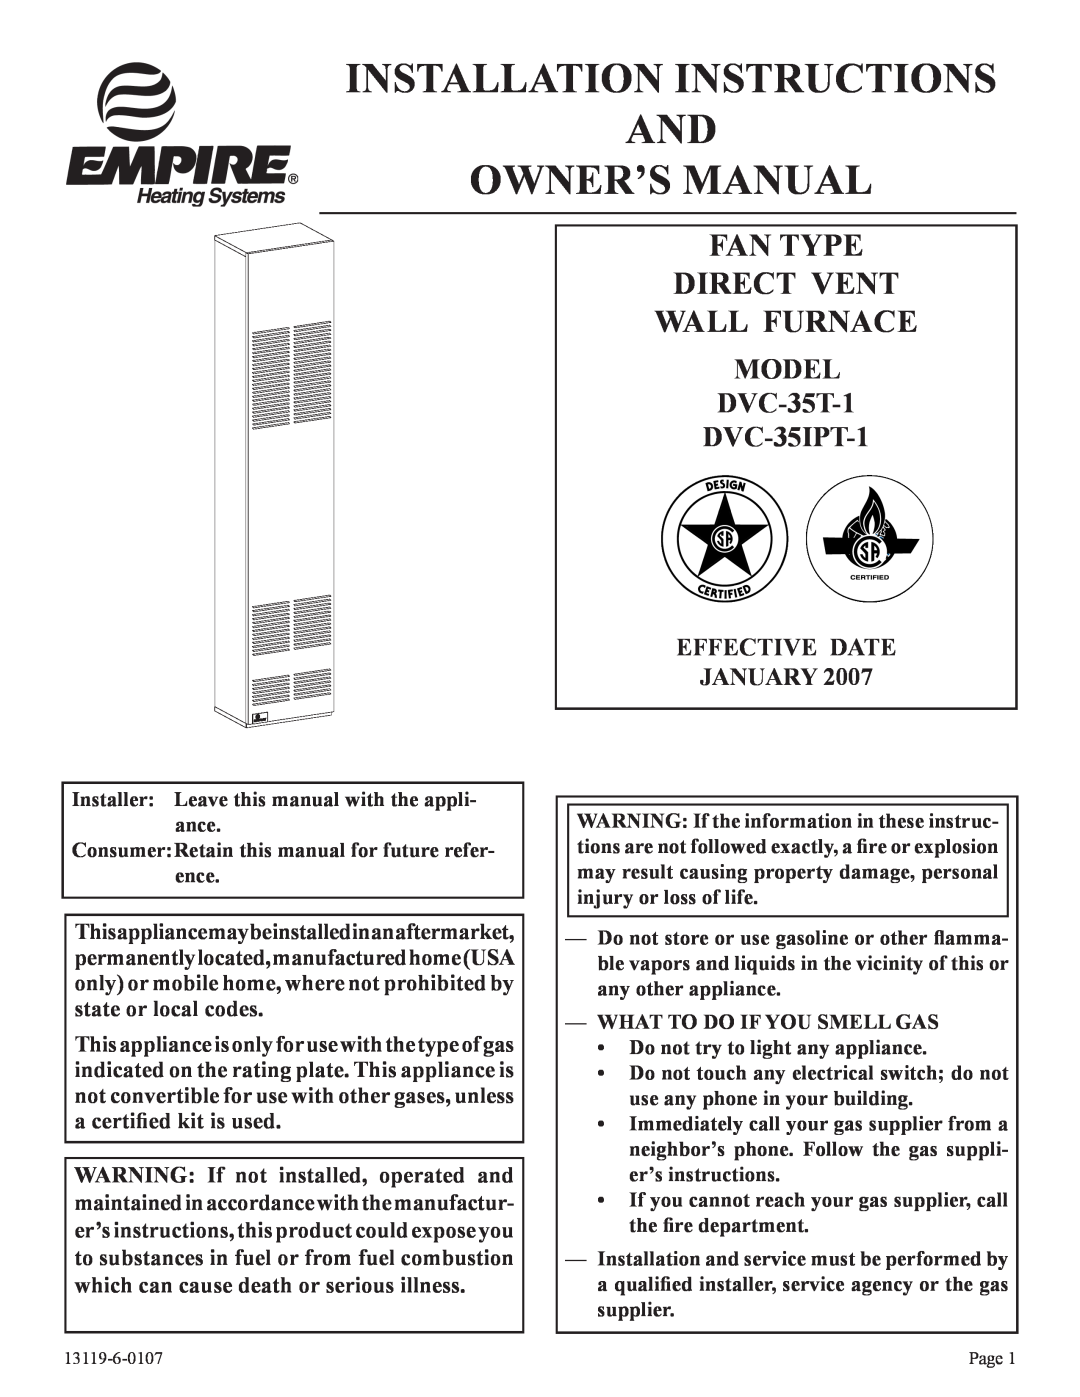 Empire Products DVC-35T-1, DVC-35IPT-1 installation instructions Fan Type Direct Vent Wall Furnace, Effective Date January 